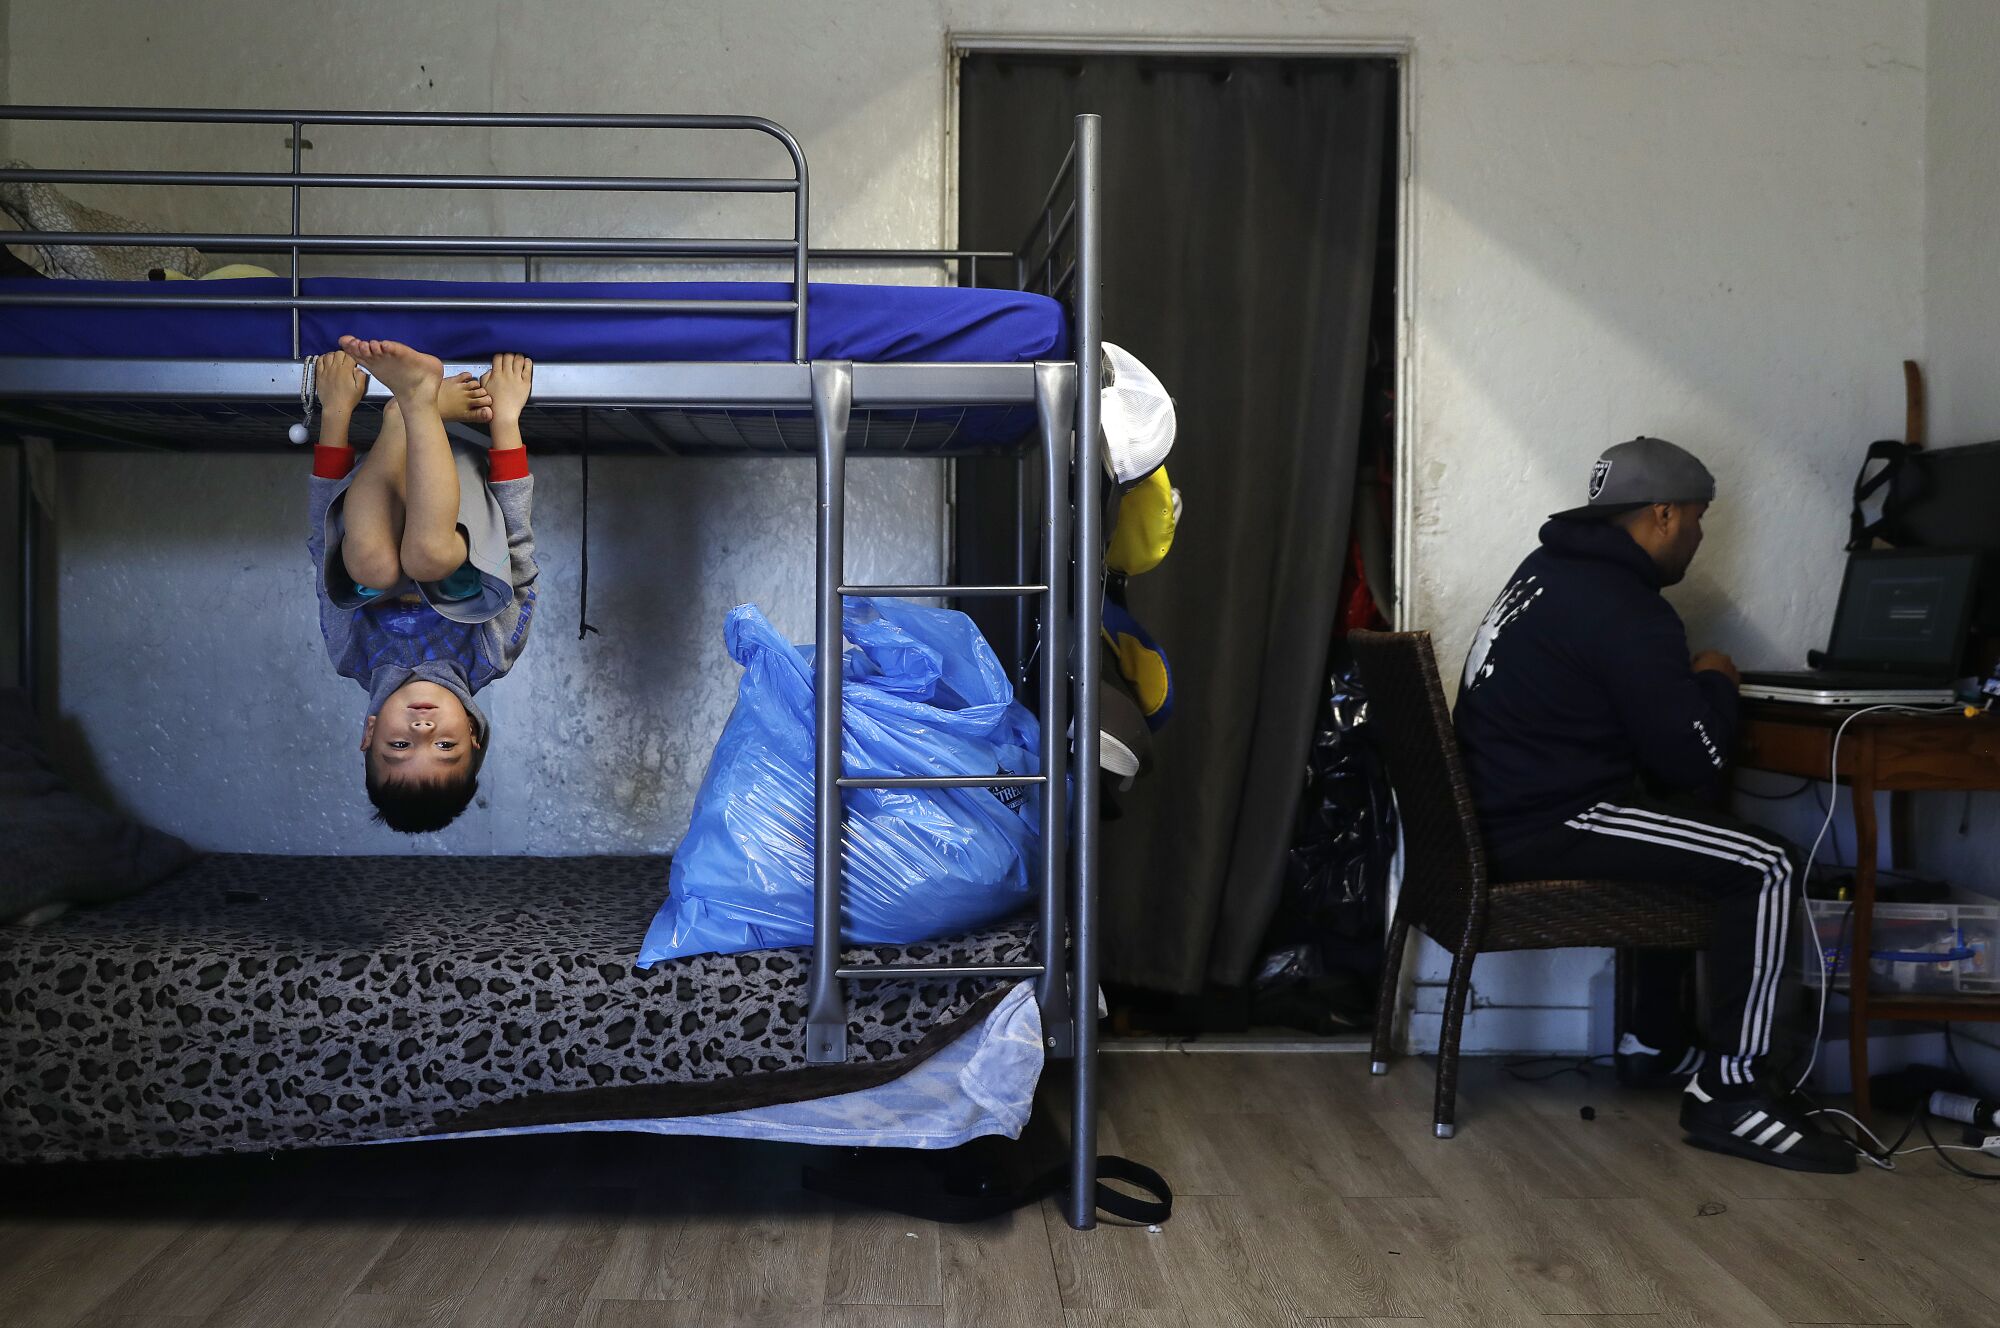 A boy hangs upside down from a bunk bed, while a man sits at the computer on the right